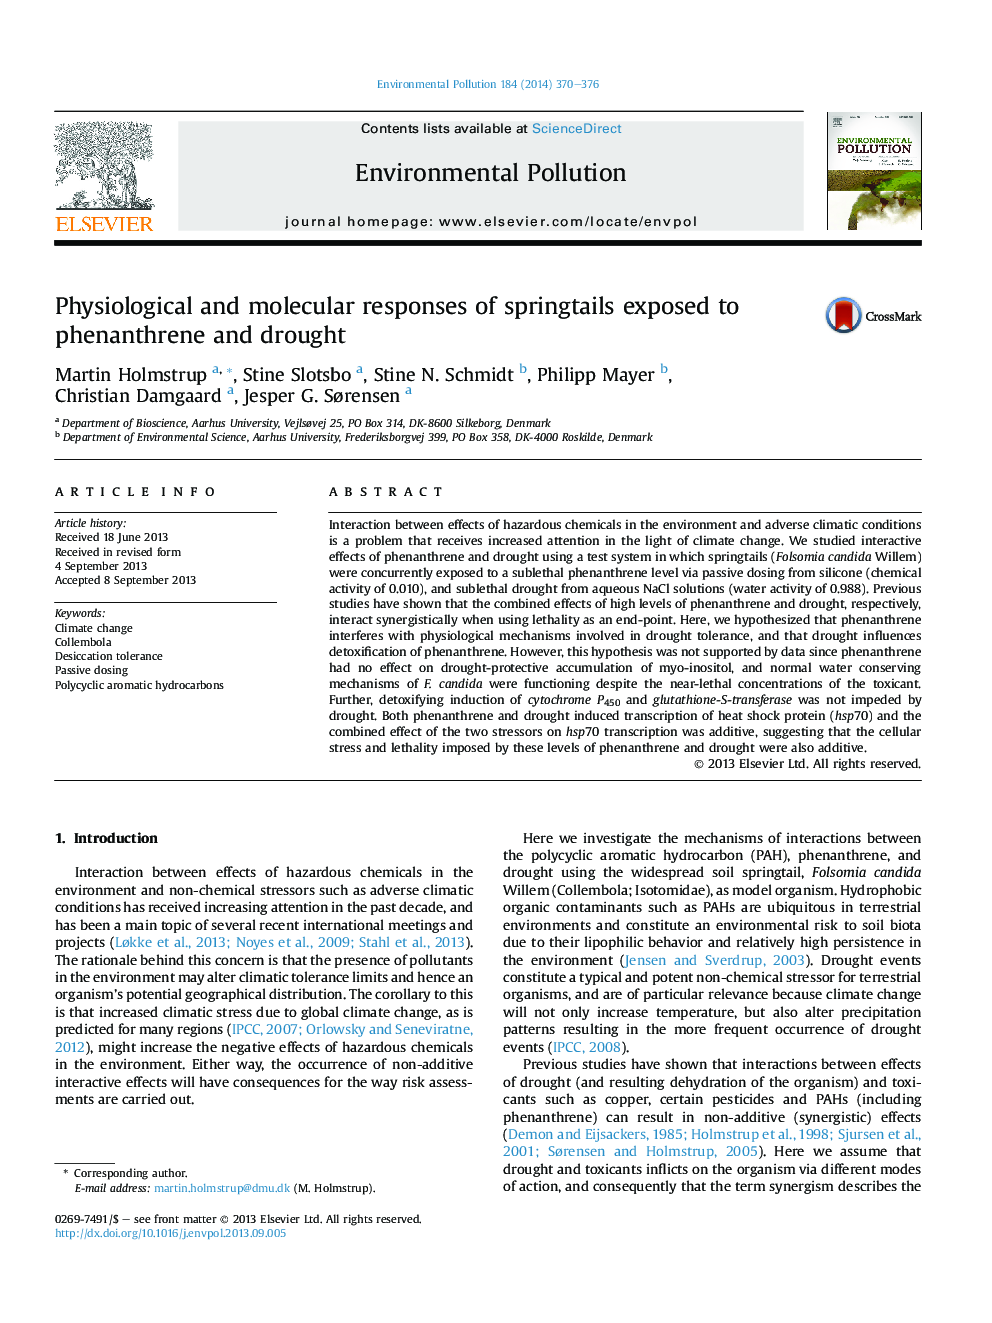 Physiological and molecular responses of springtails exposed to phenanthrene and drought